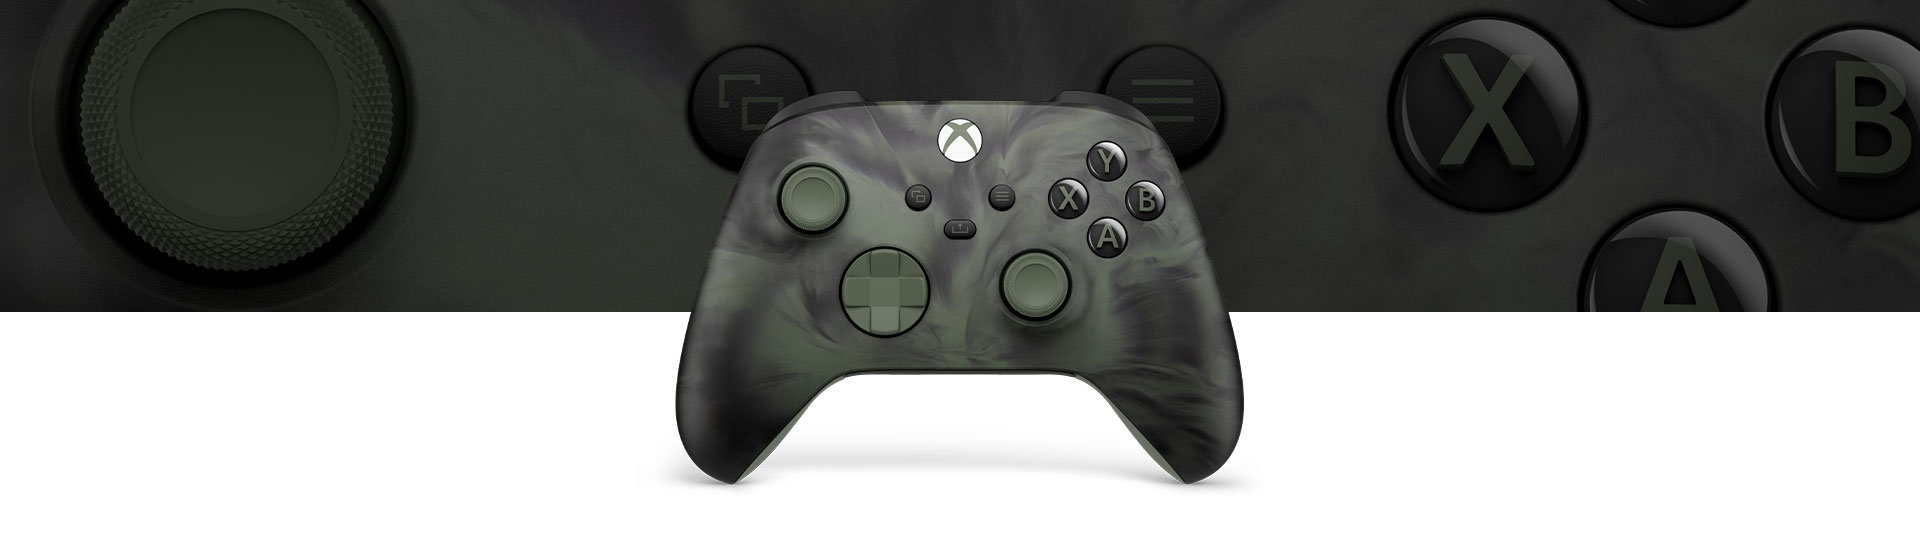 Front view of Xbox Wireless Controller – Nocturnal Vapor Special Edition with close-up view in the background.